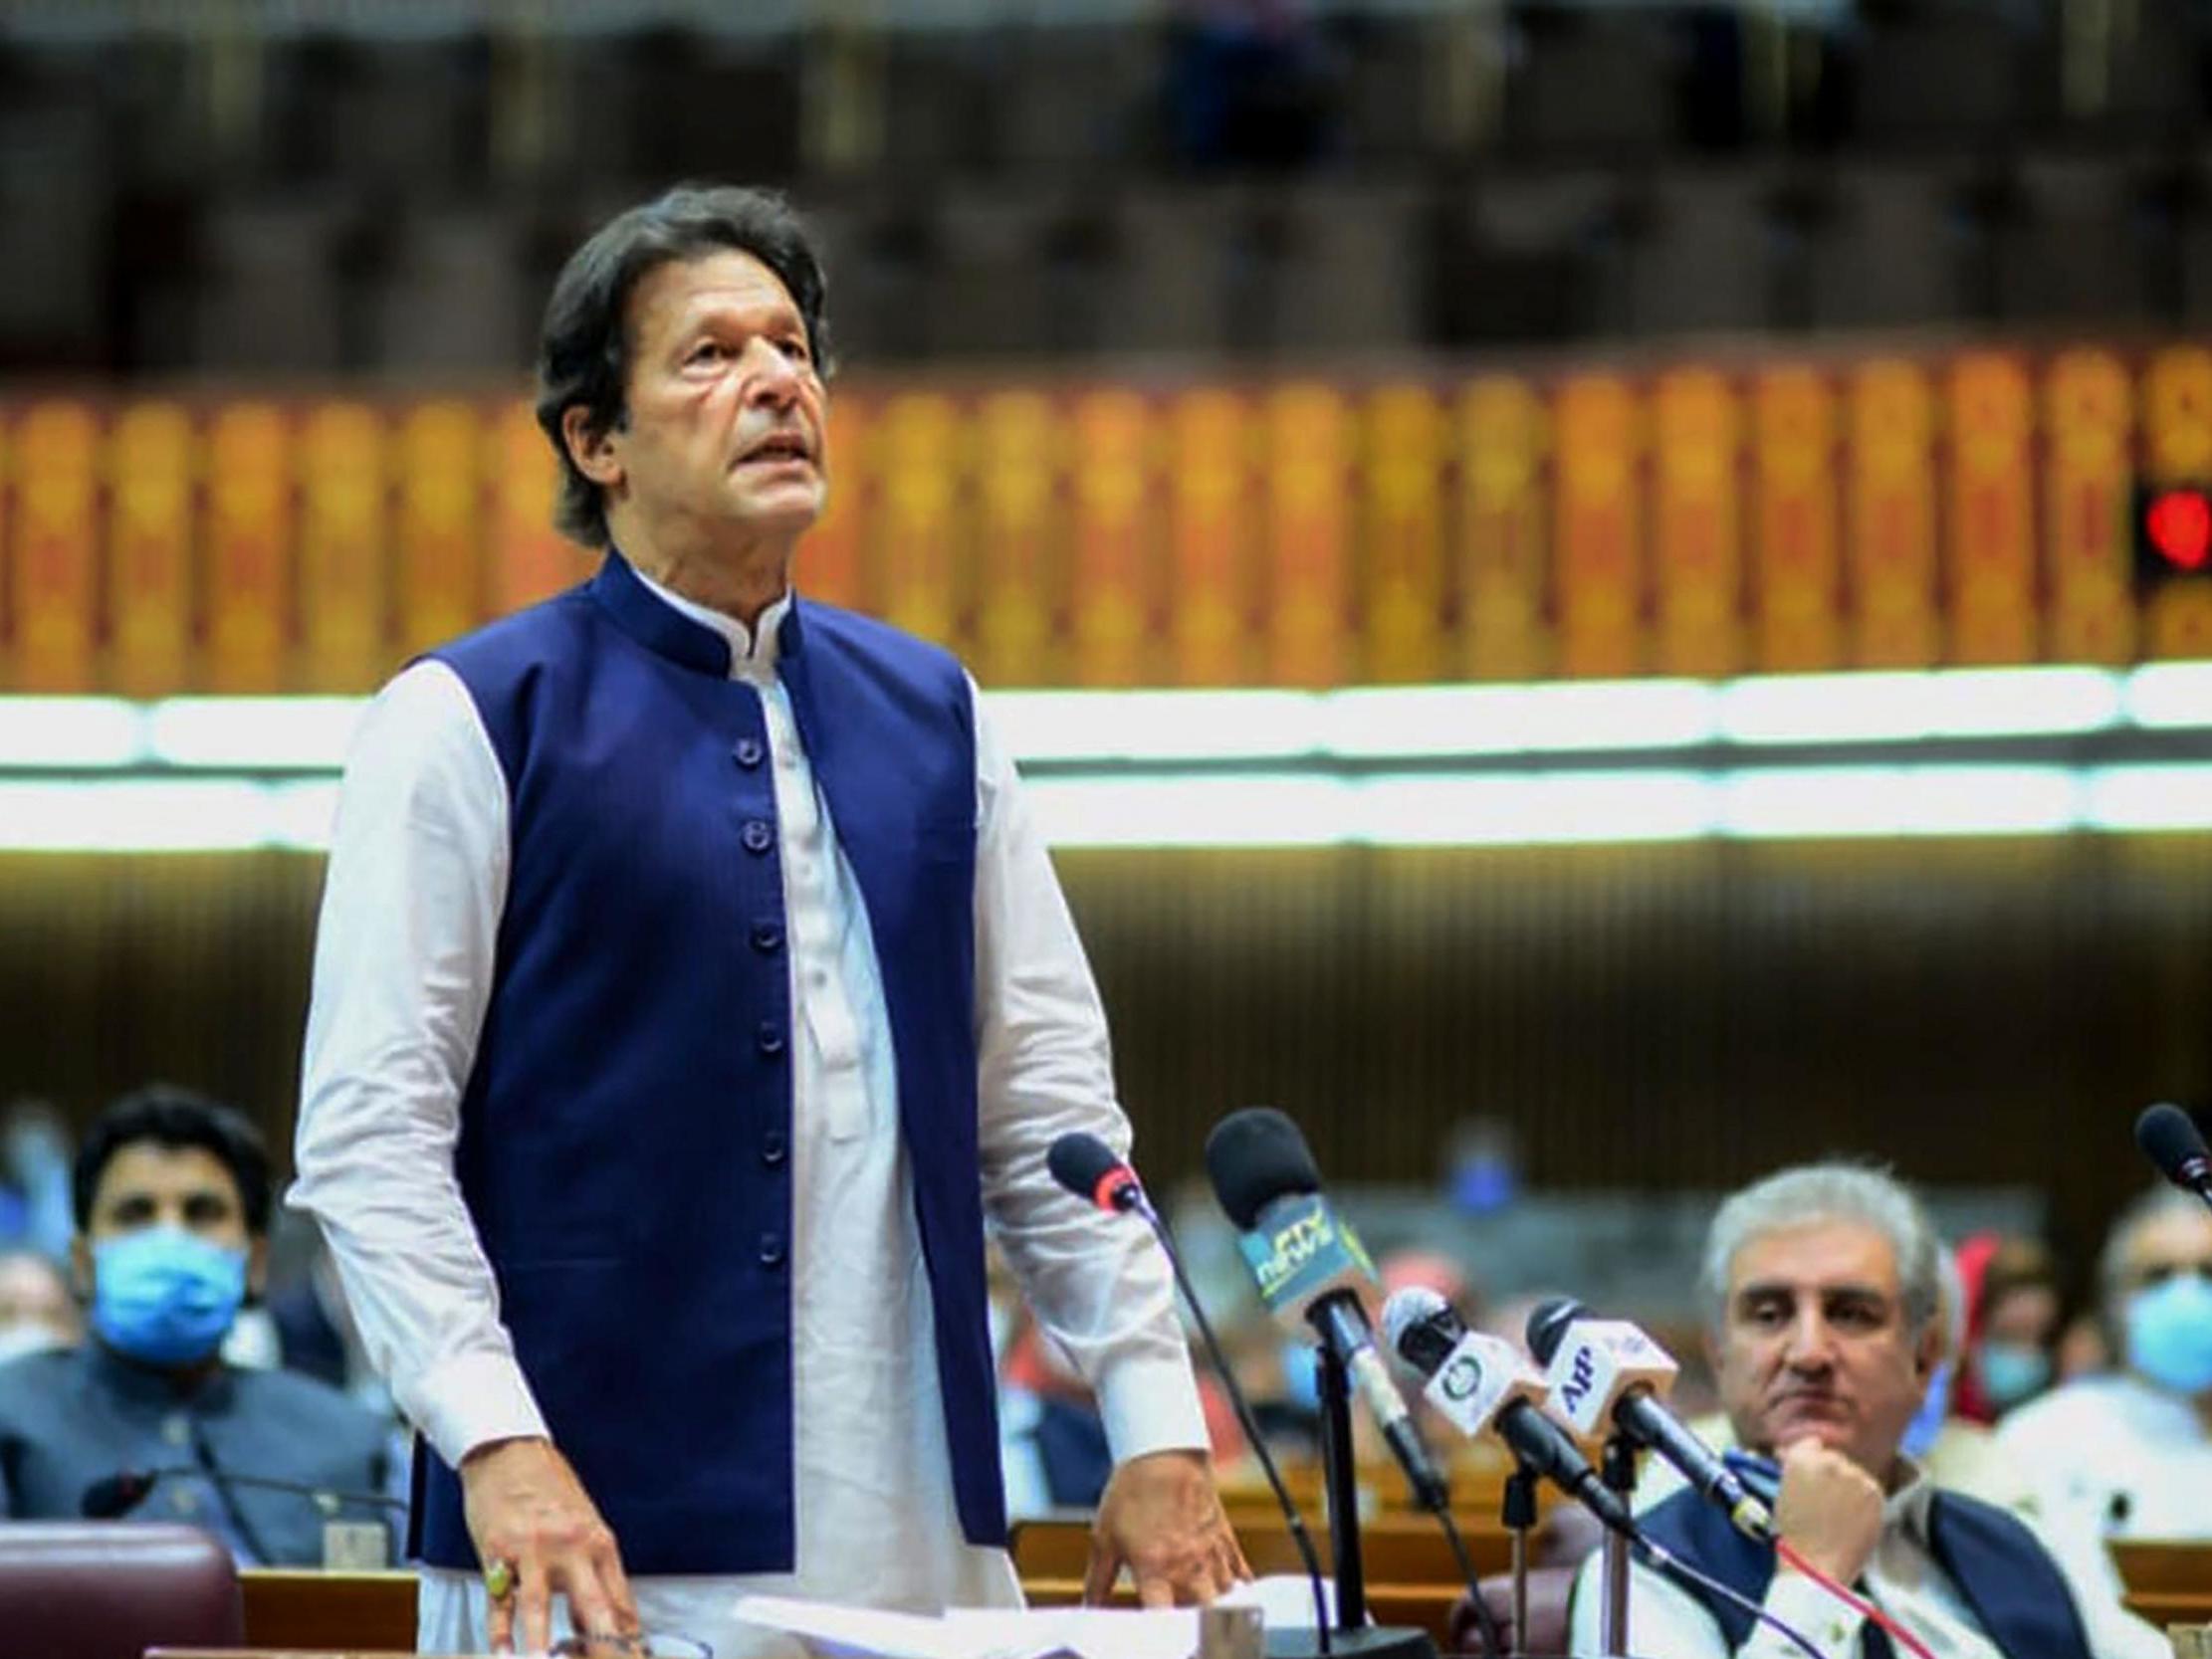 Pakistan's Prime Minister Imran Khan (L) speaks during a National Assembly session in Islamabad on 25 June, 2020.